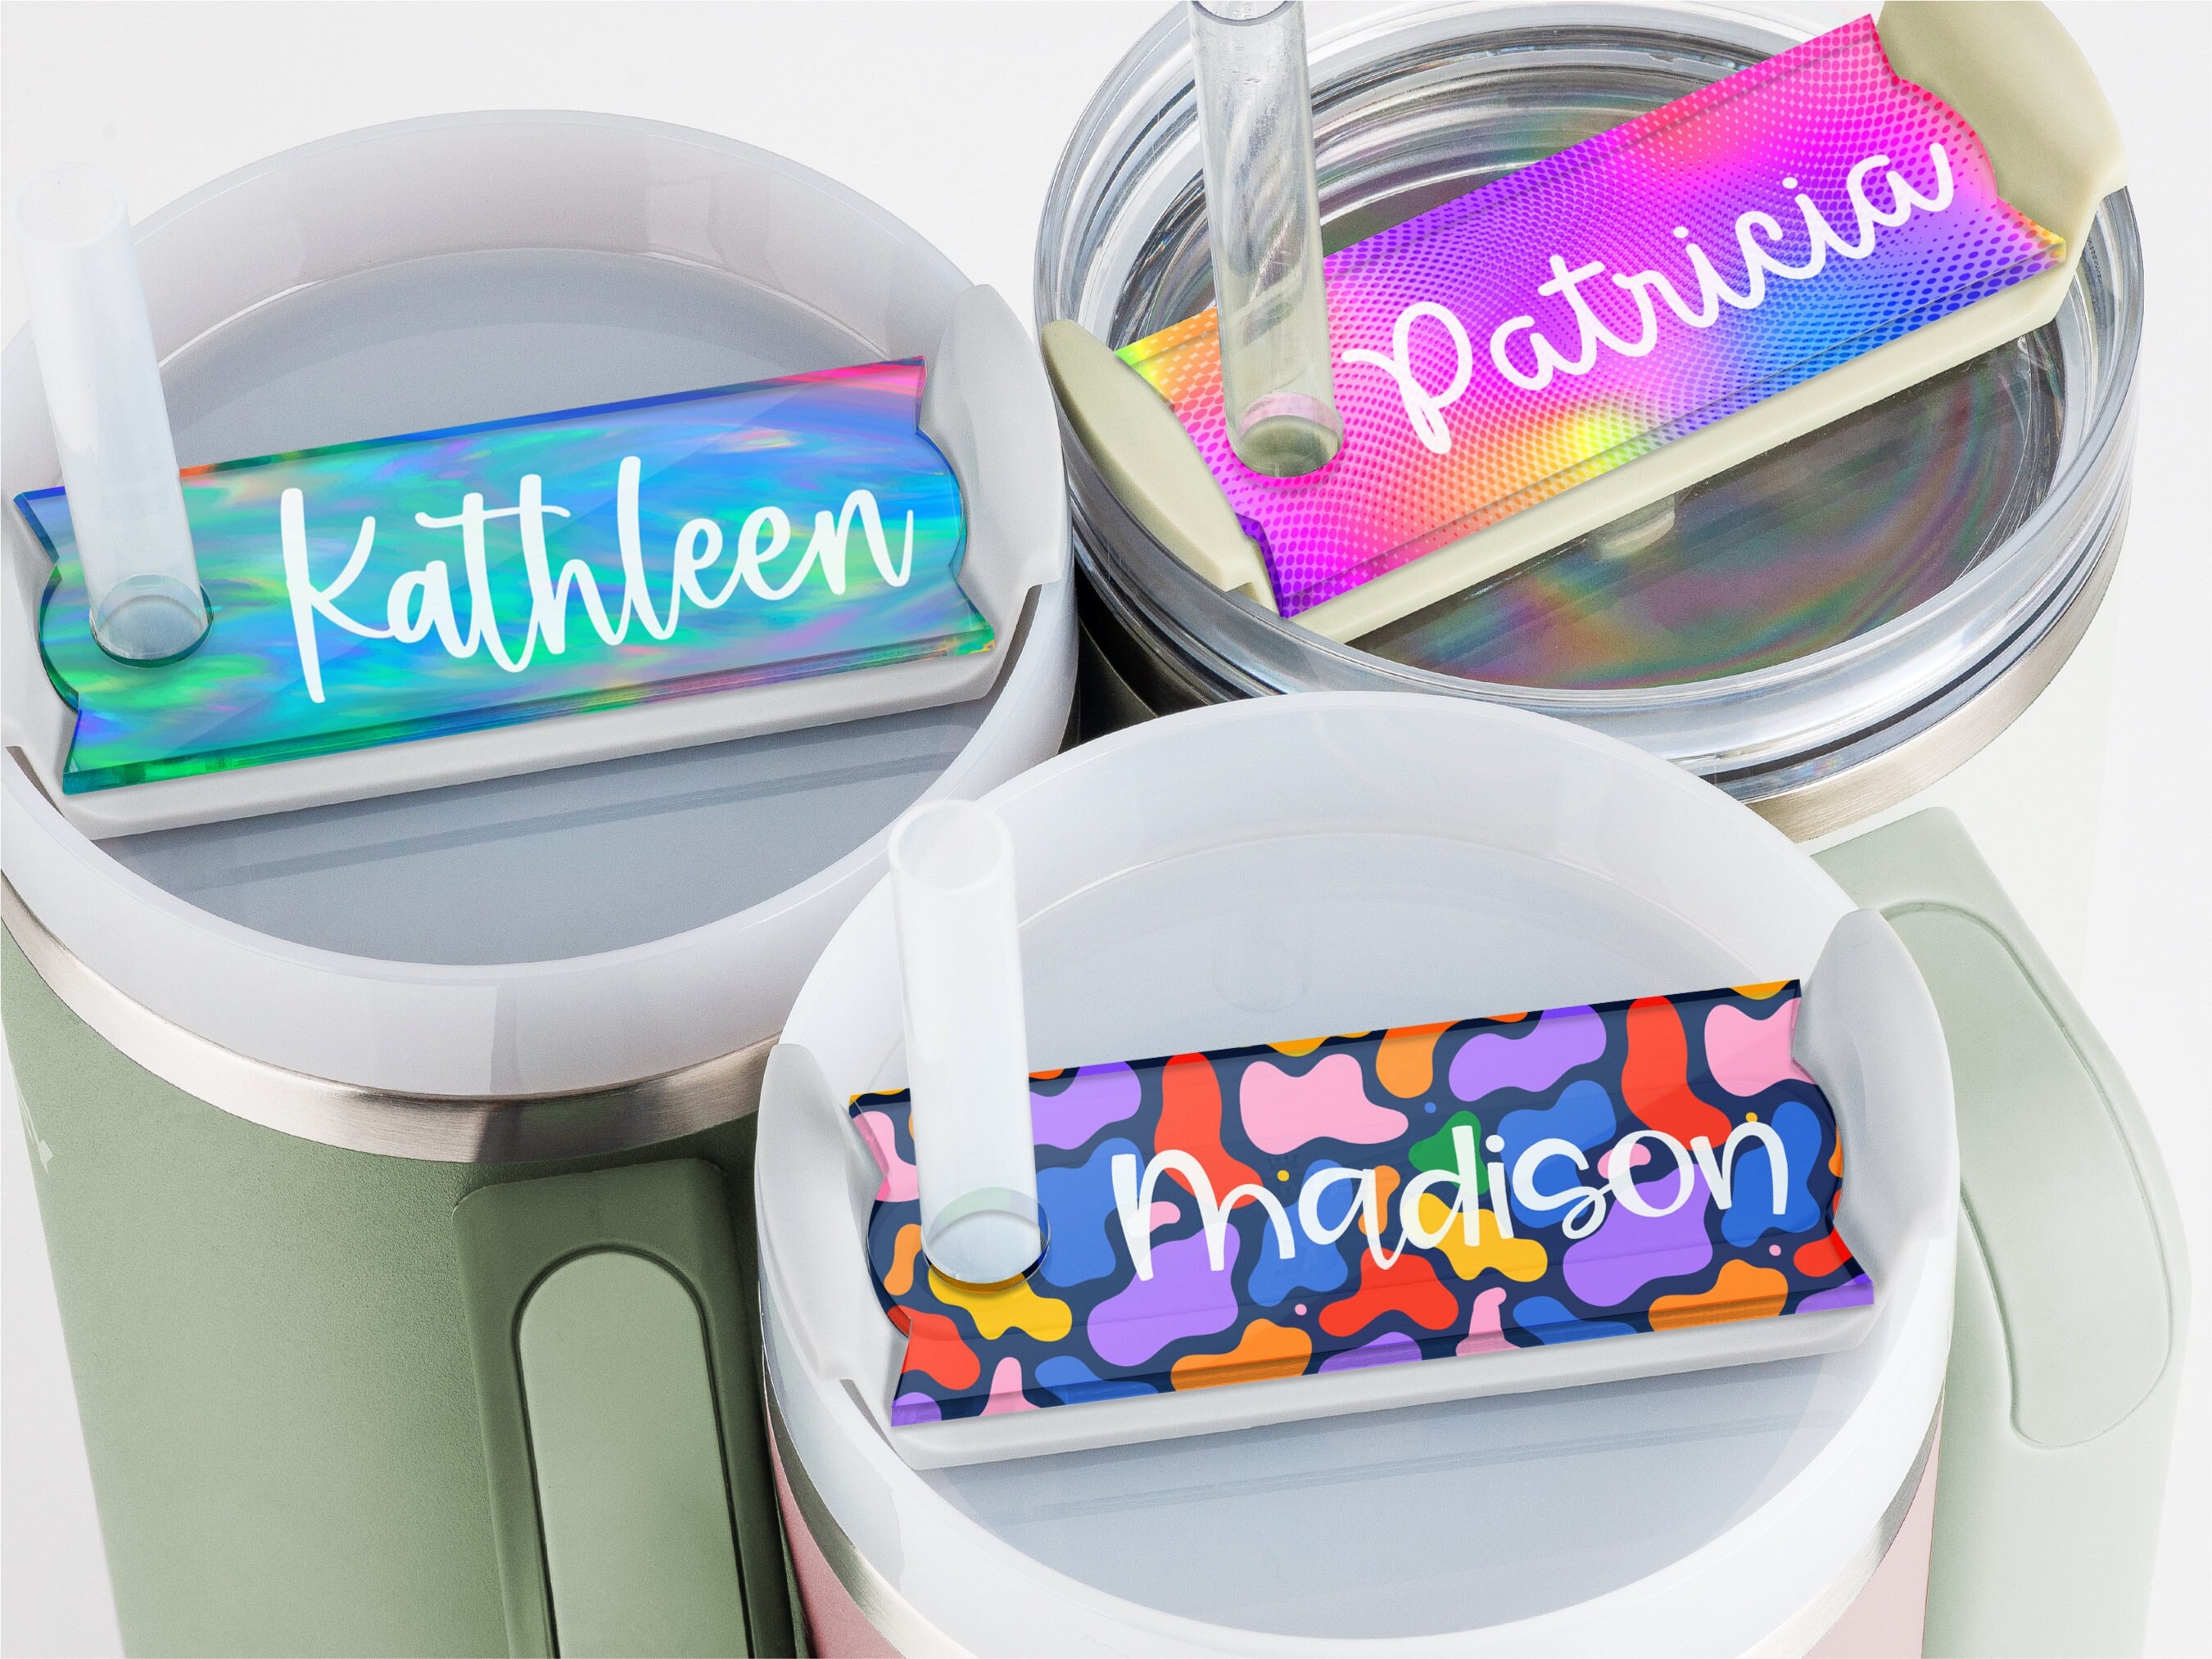 Stanley Personalized Tumbler Name Tag - Make it Yours! – Festive Gal